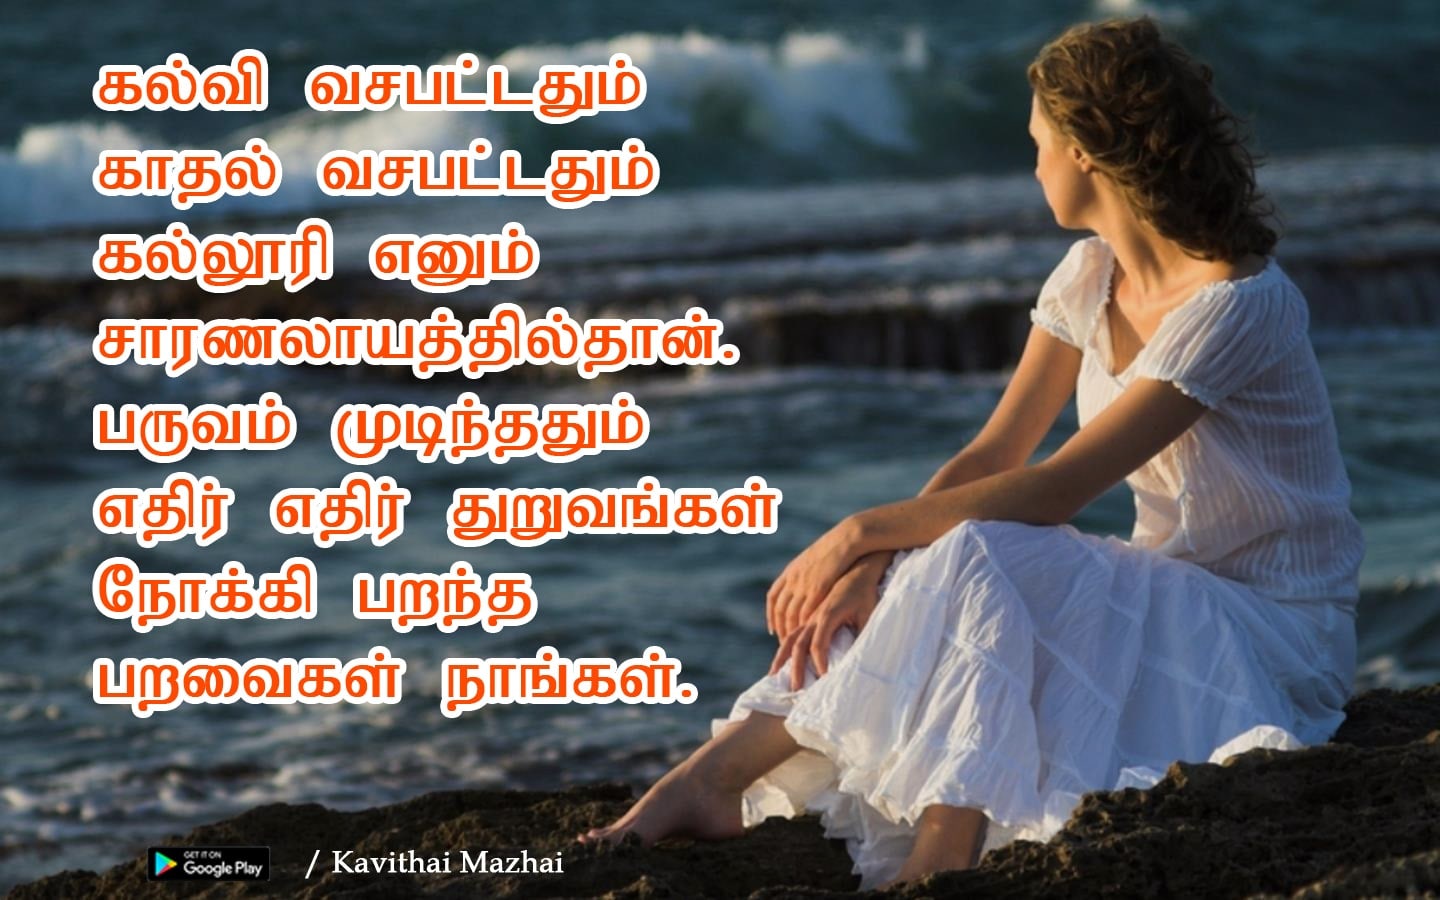 Whatsapp Dp Love Kavithai Tamil Image Download Hd - Get Images Four